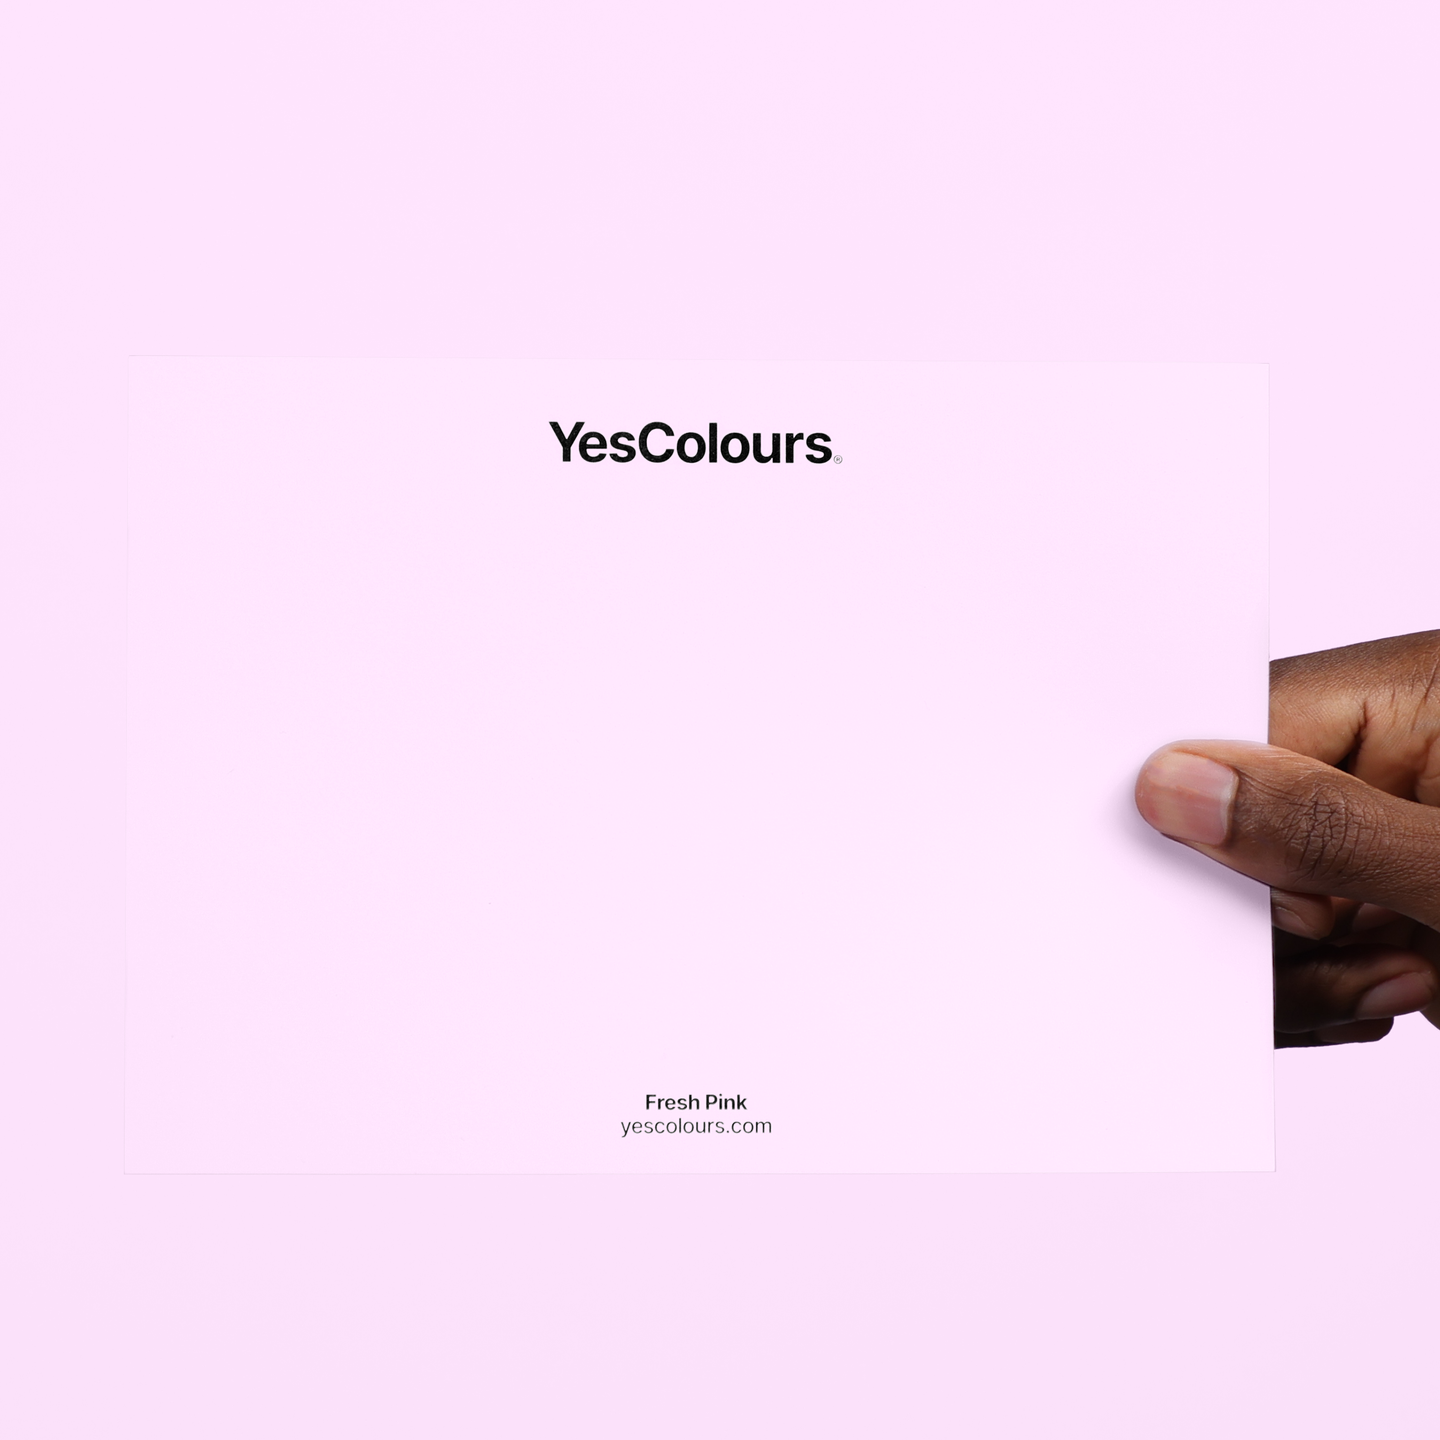 YesColours premium Fresh Pink paint swatch